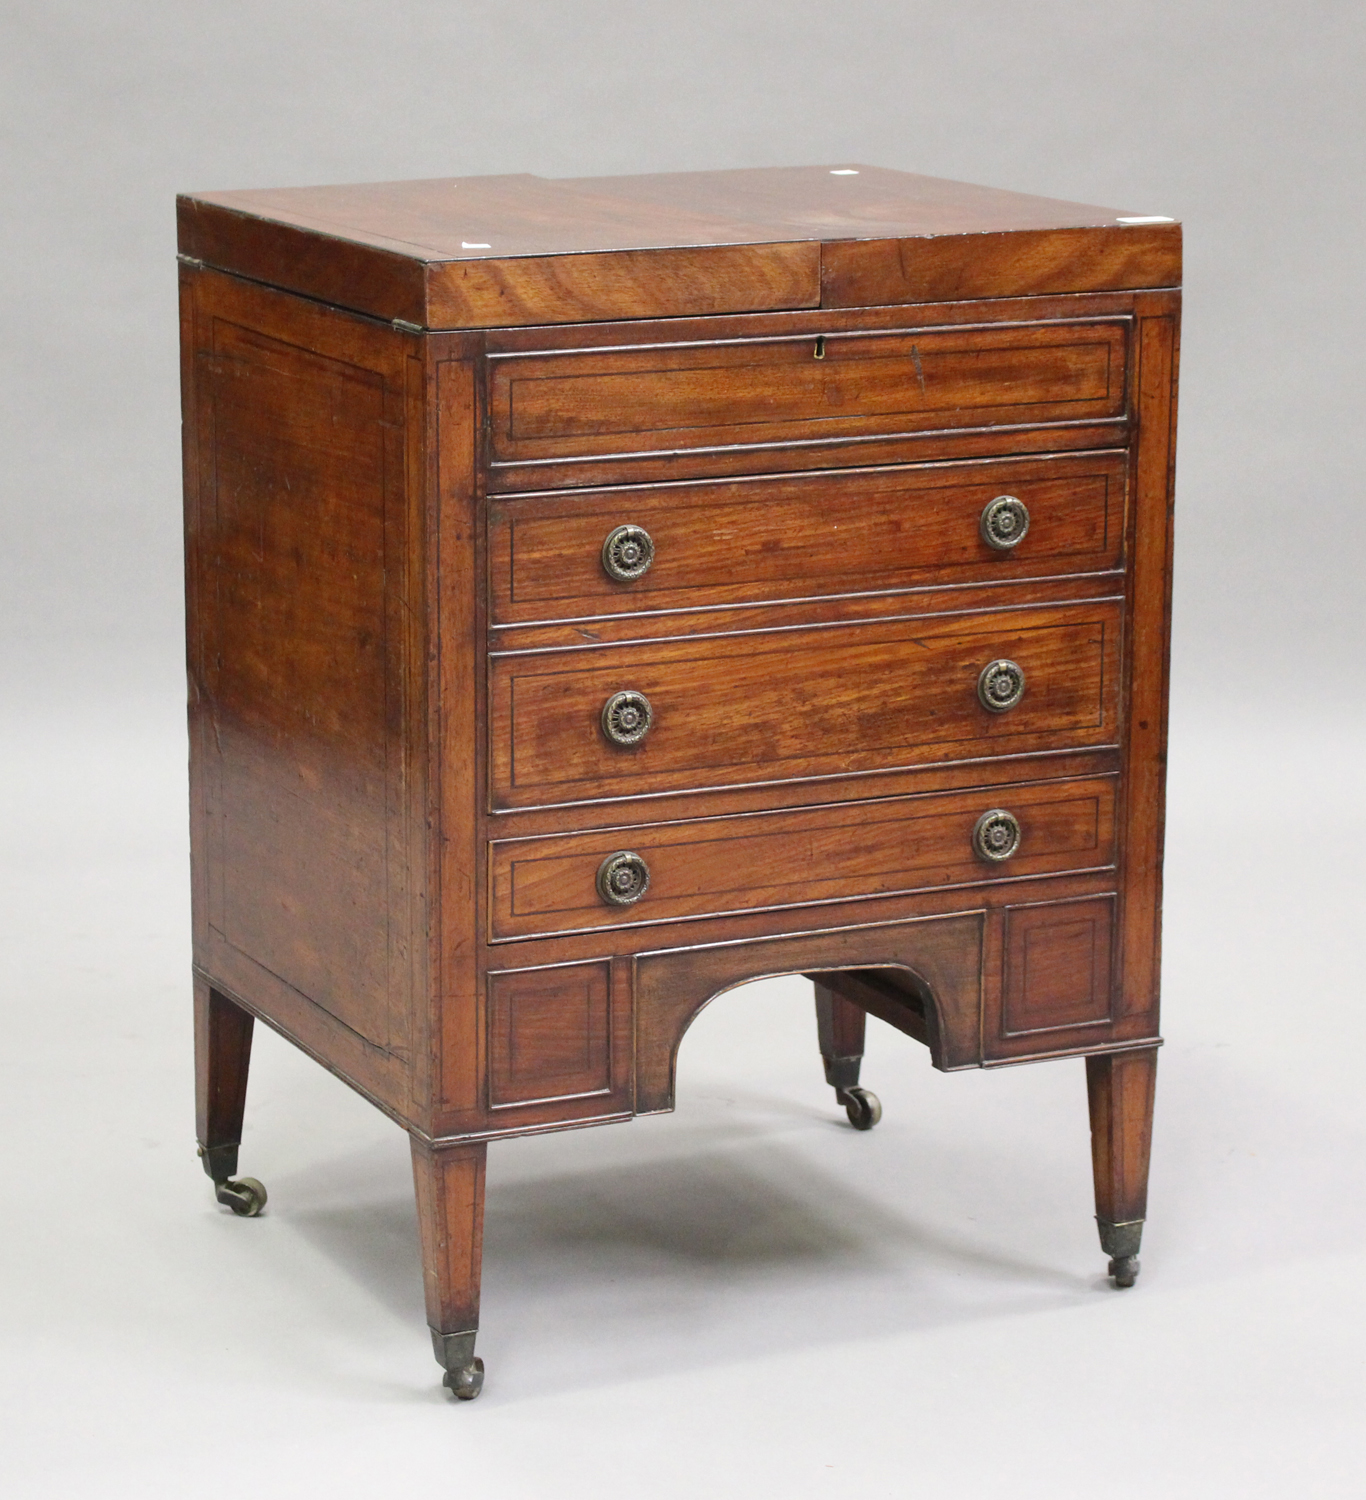 A George III mahogany dressing table, the double hinged top revealing a compartmentalized interior